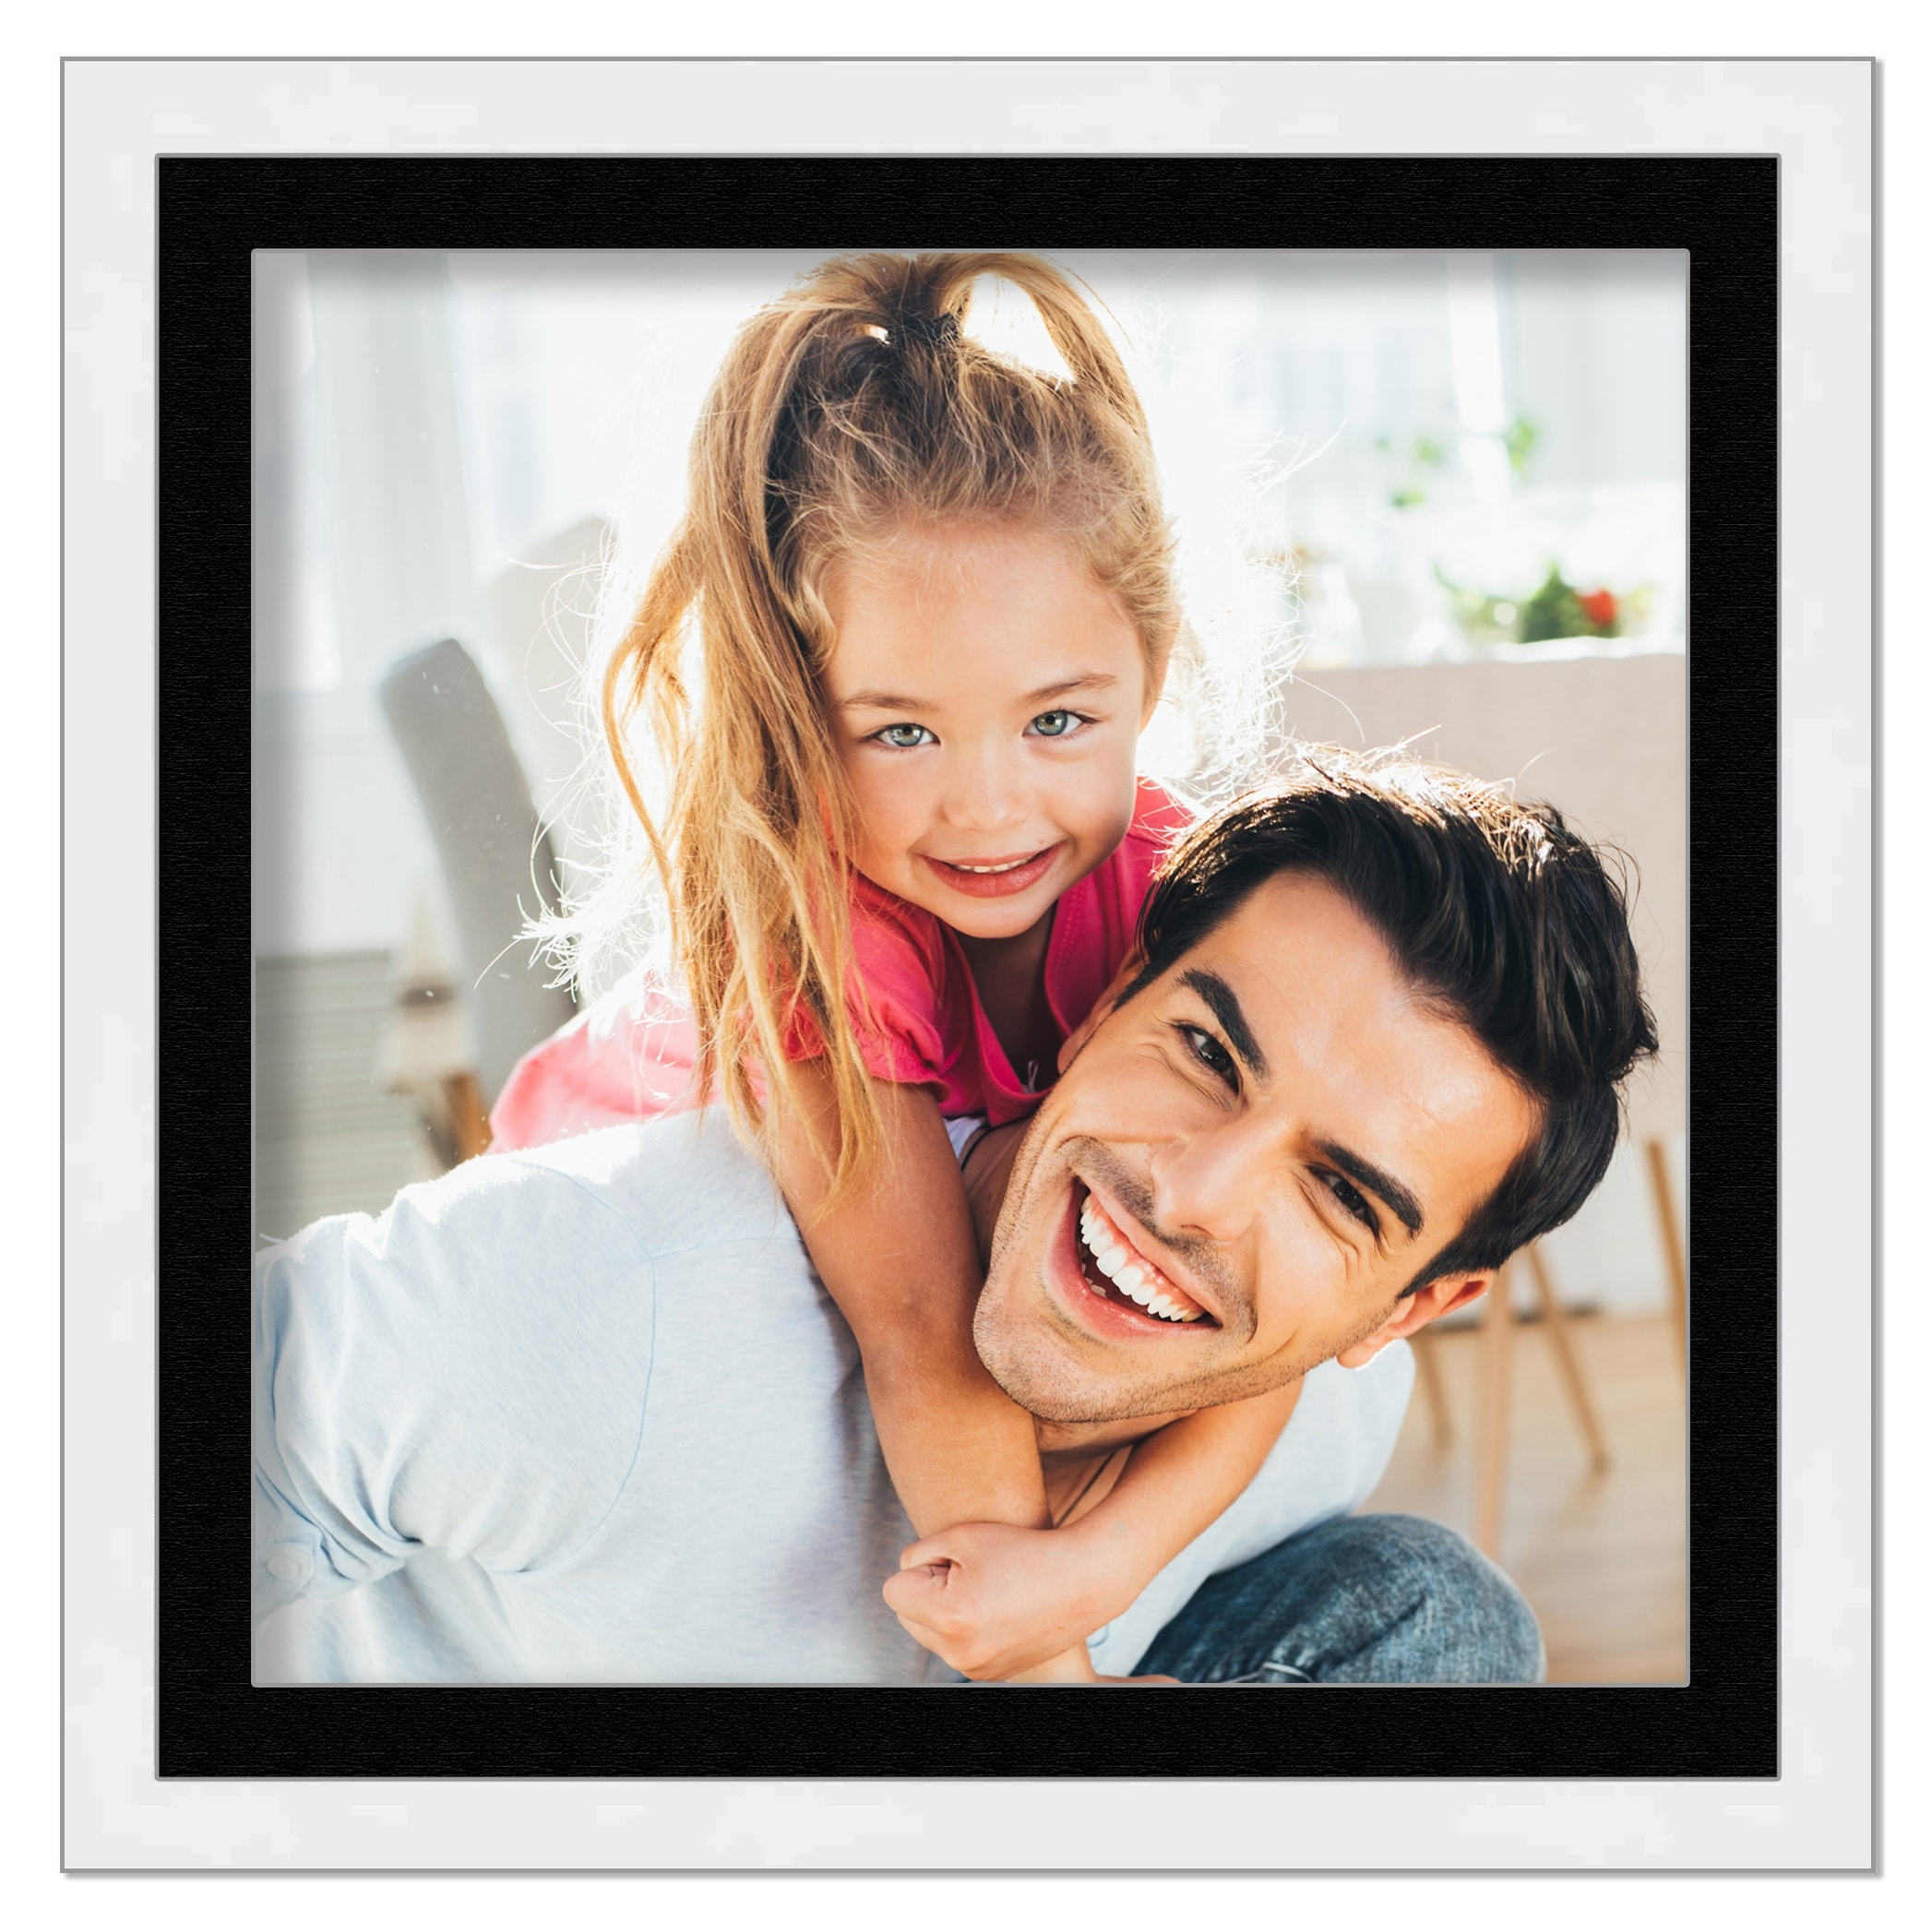 28x28 Frame with Mat - White 30x30 Frame Wood Made to Display Print or Poster Measuring 28 x 28 Inches with White Photo Mat